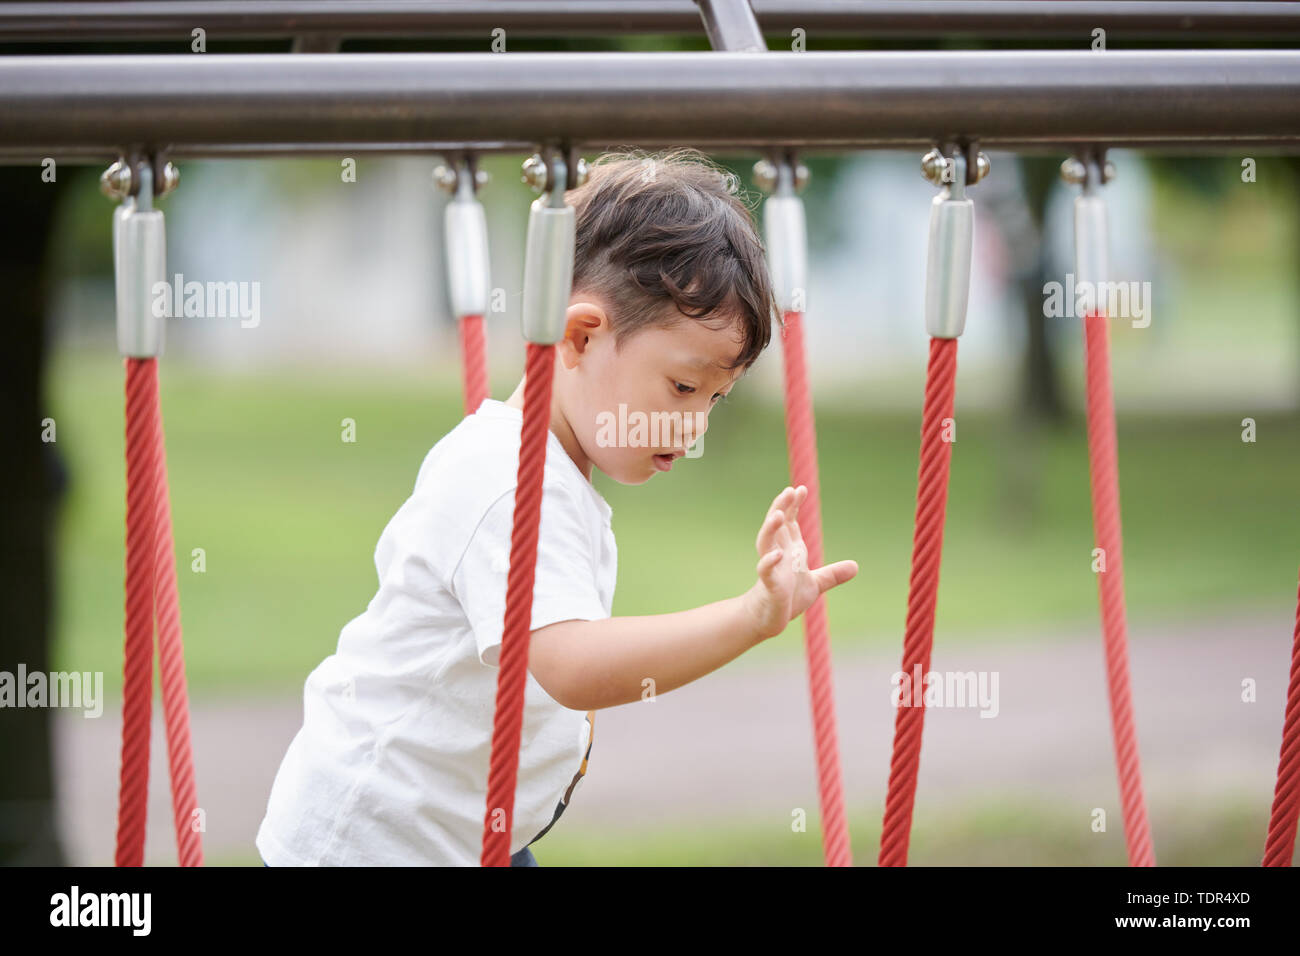 Japanese kid in a city park Stock Photo